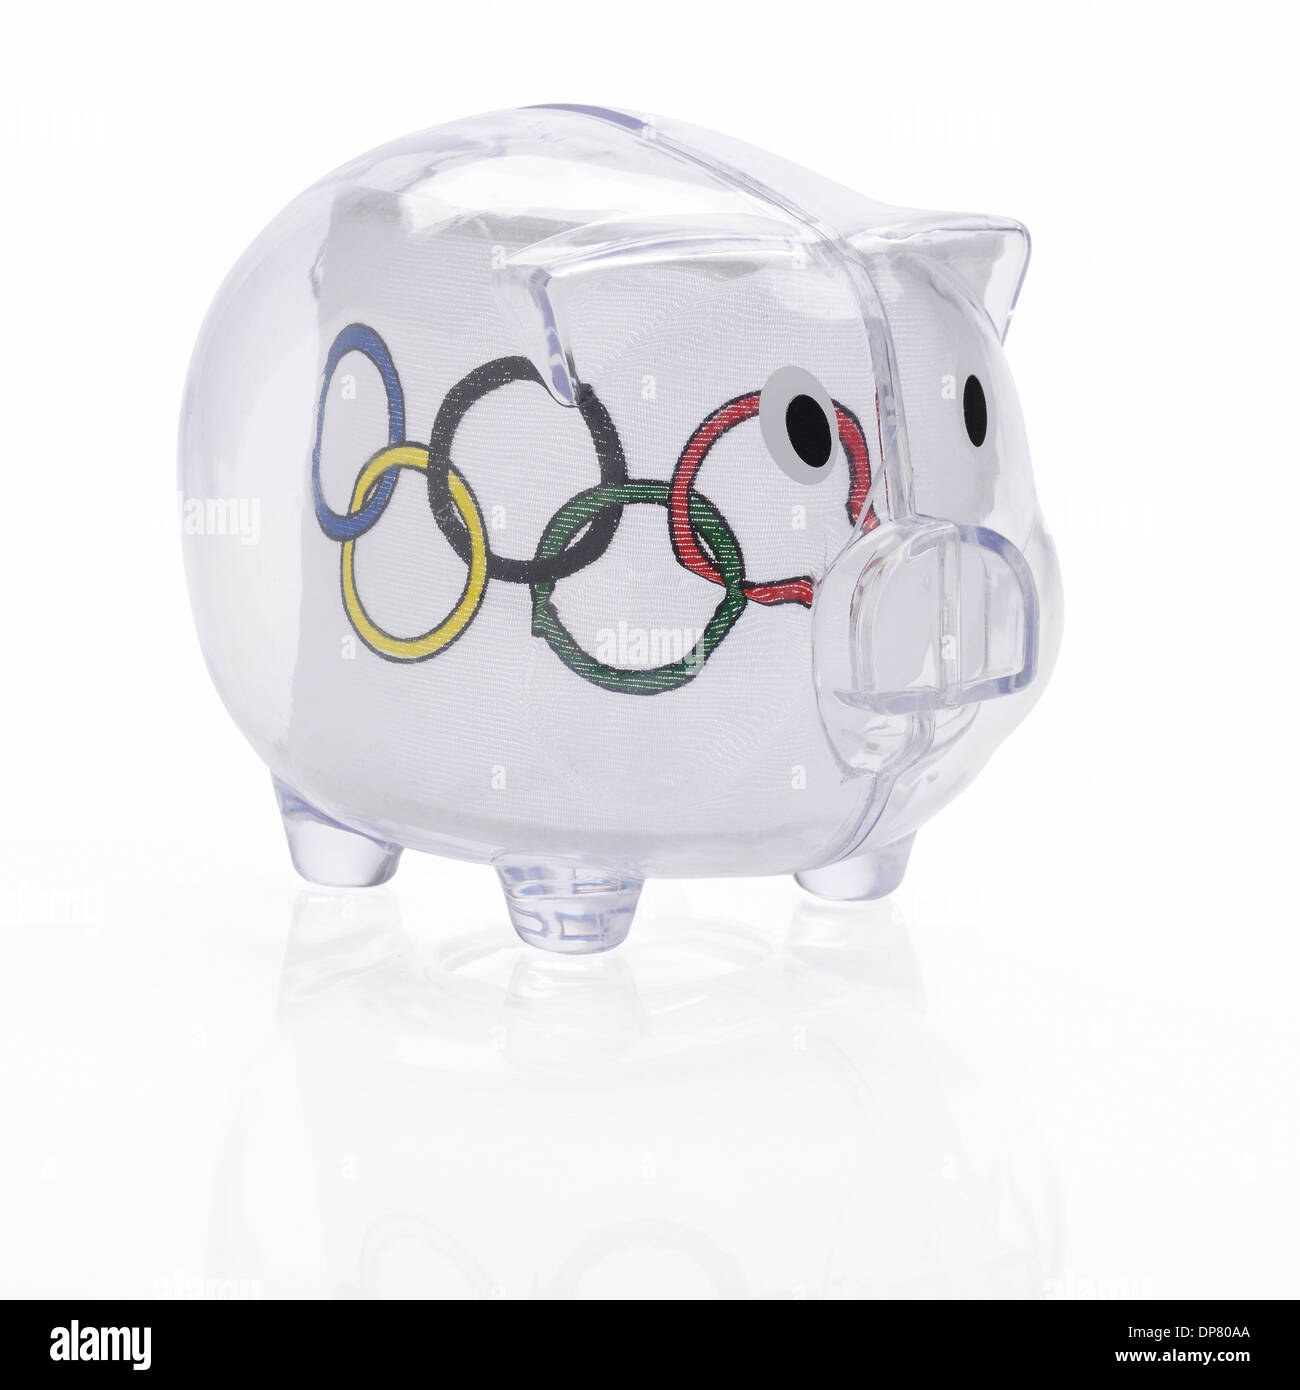 Olympic flag inside a clear plastic piggy bank Stock Photo